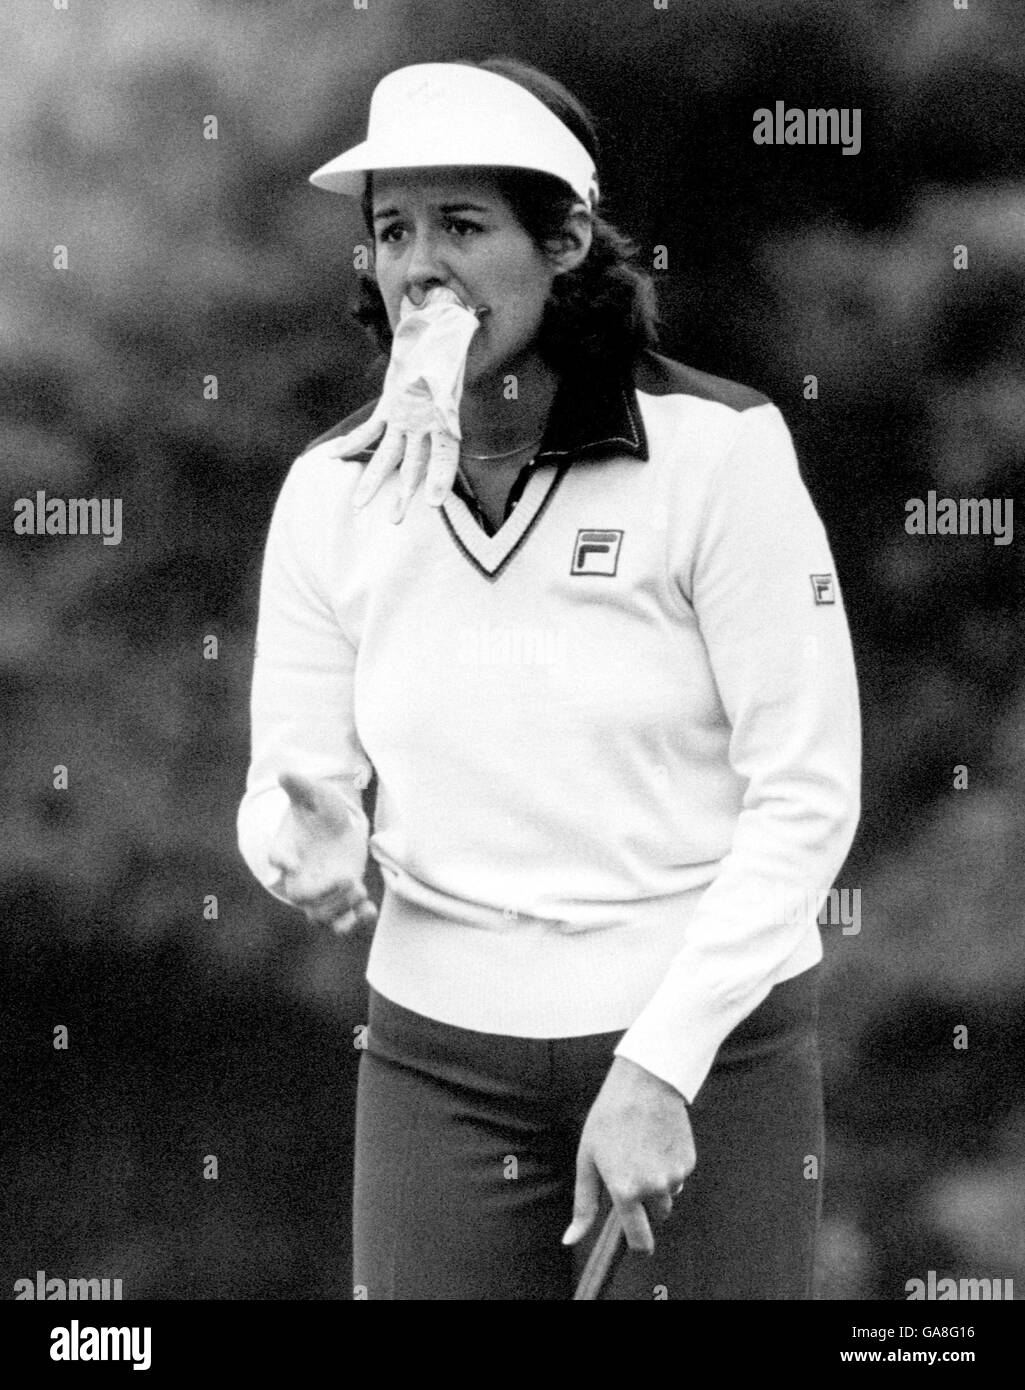 Golf - Colgate Ladies' Tournament - Sunningdale. Nancy Lopez holds her glove in her mouth as she waits to catch a golf ball Stock Photo